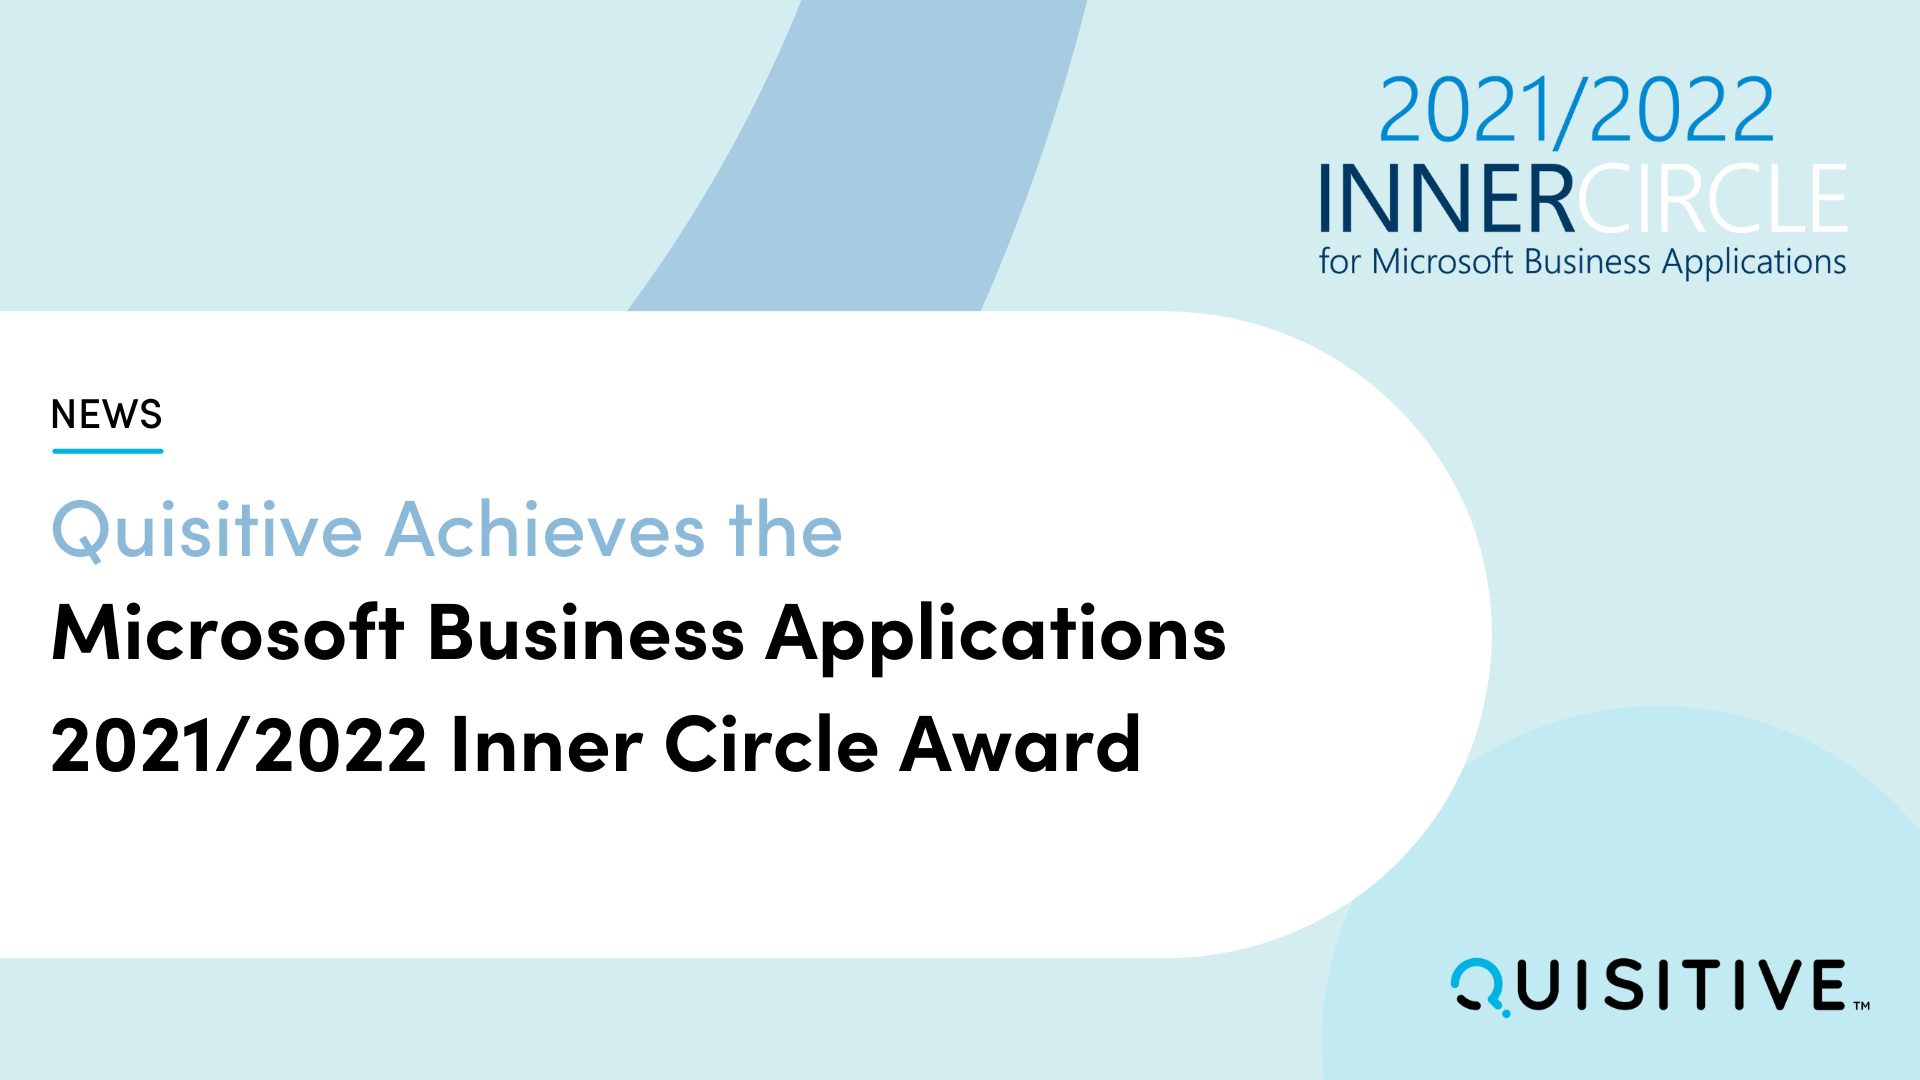 Microsoft Inner Circle Award for Business Applications